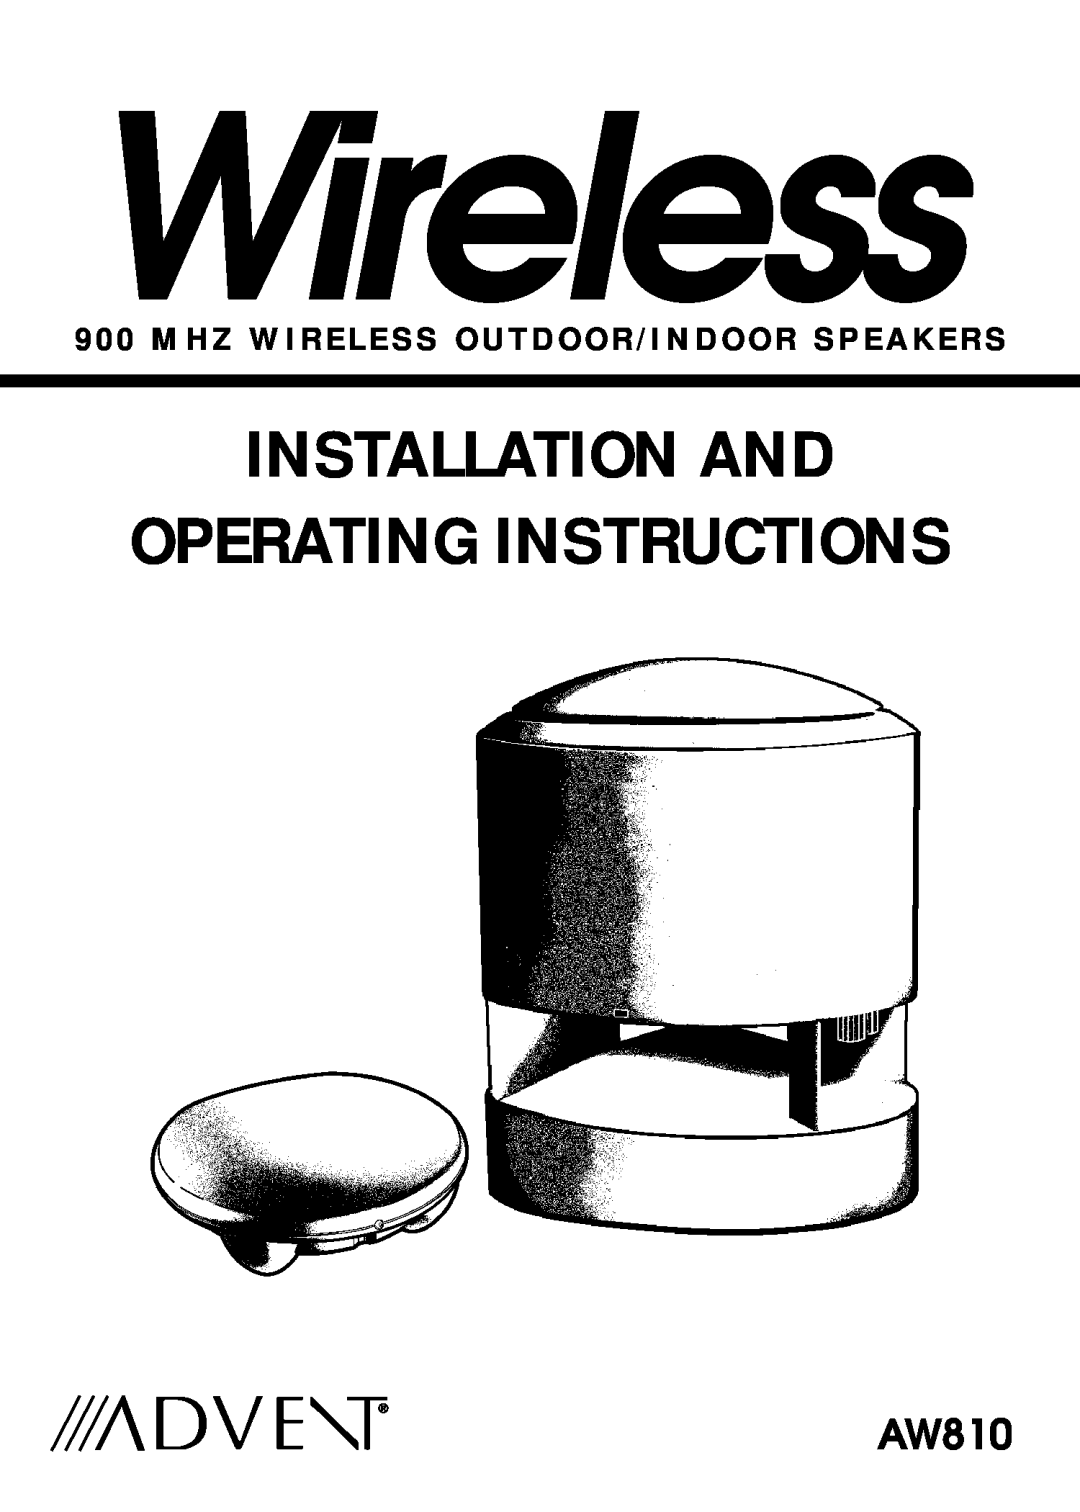 Recoton/Advent AW810 operating instructions Wireless, Installation And, Operating Instructions 